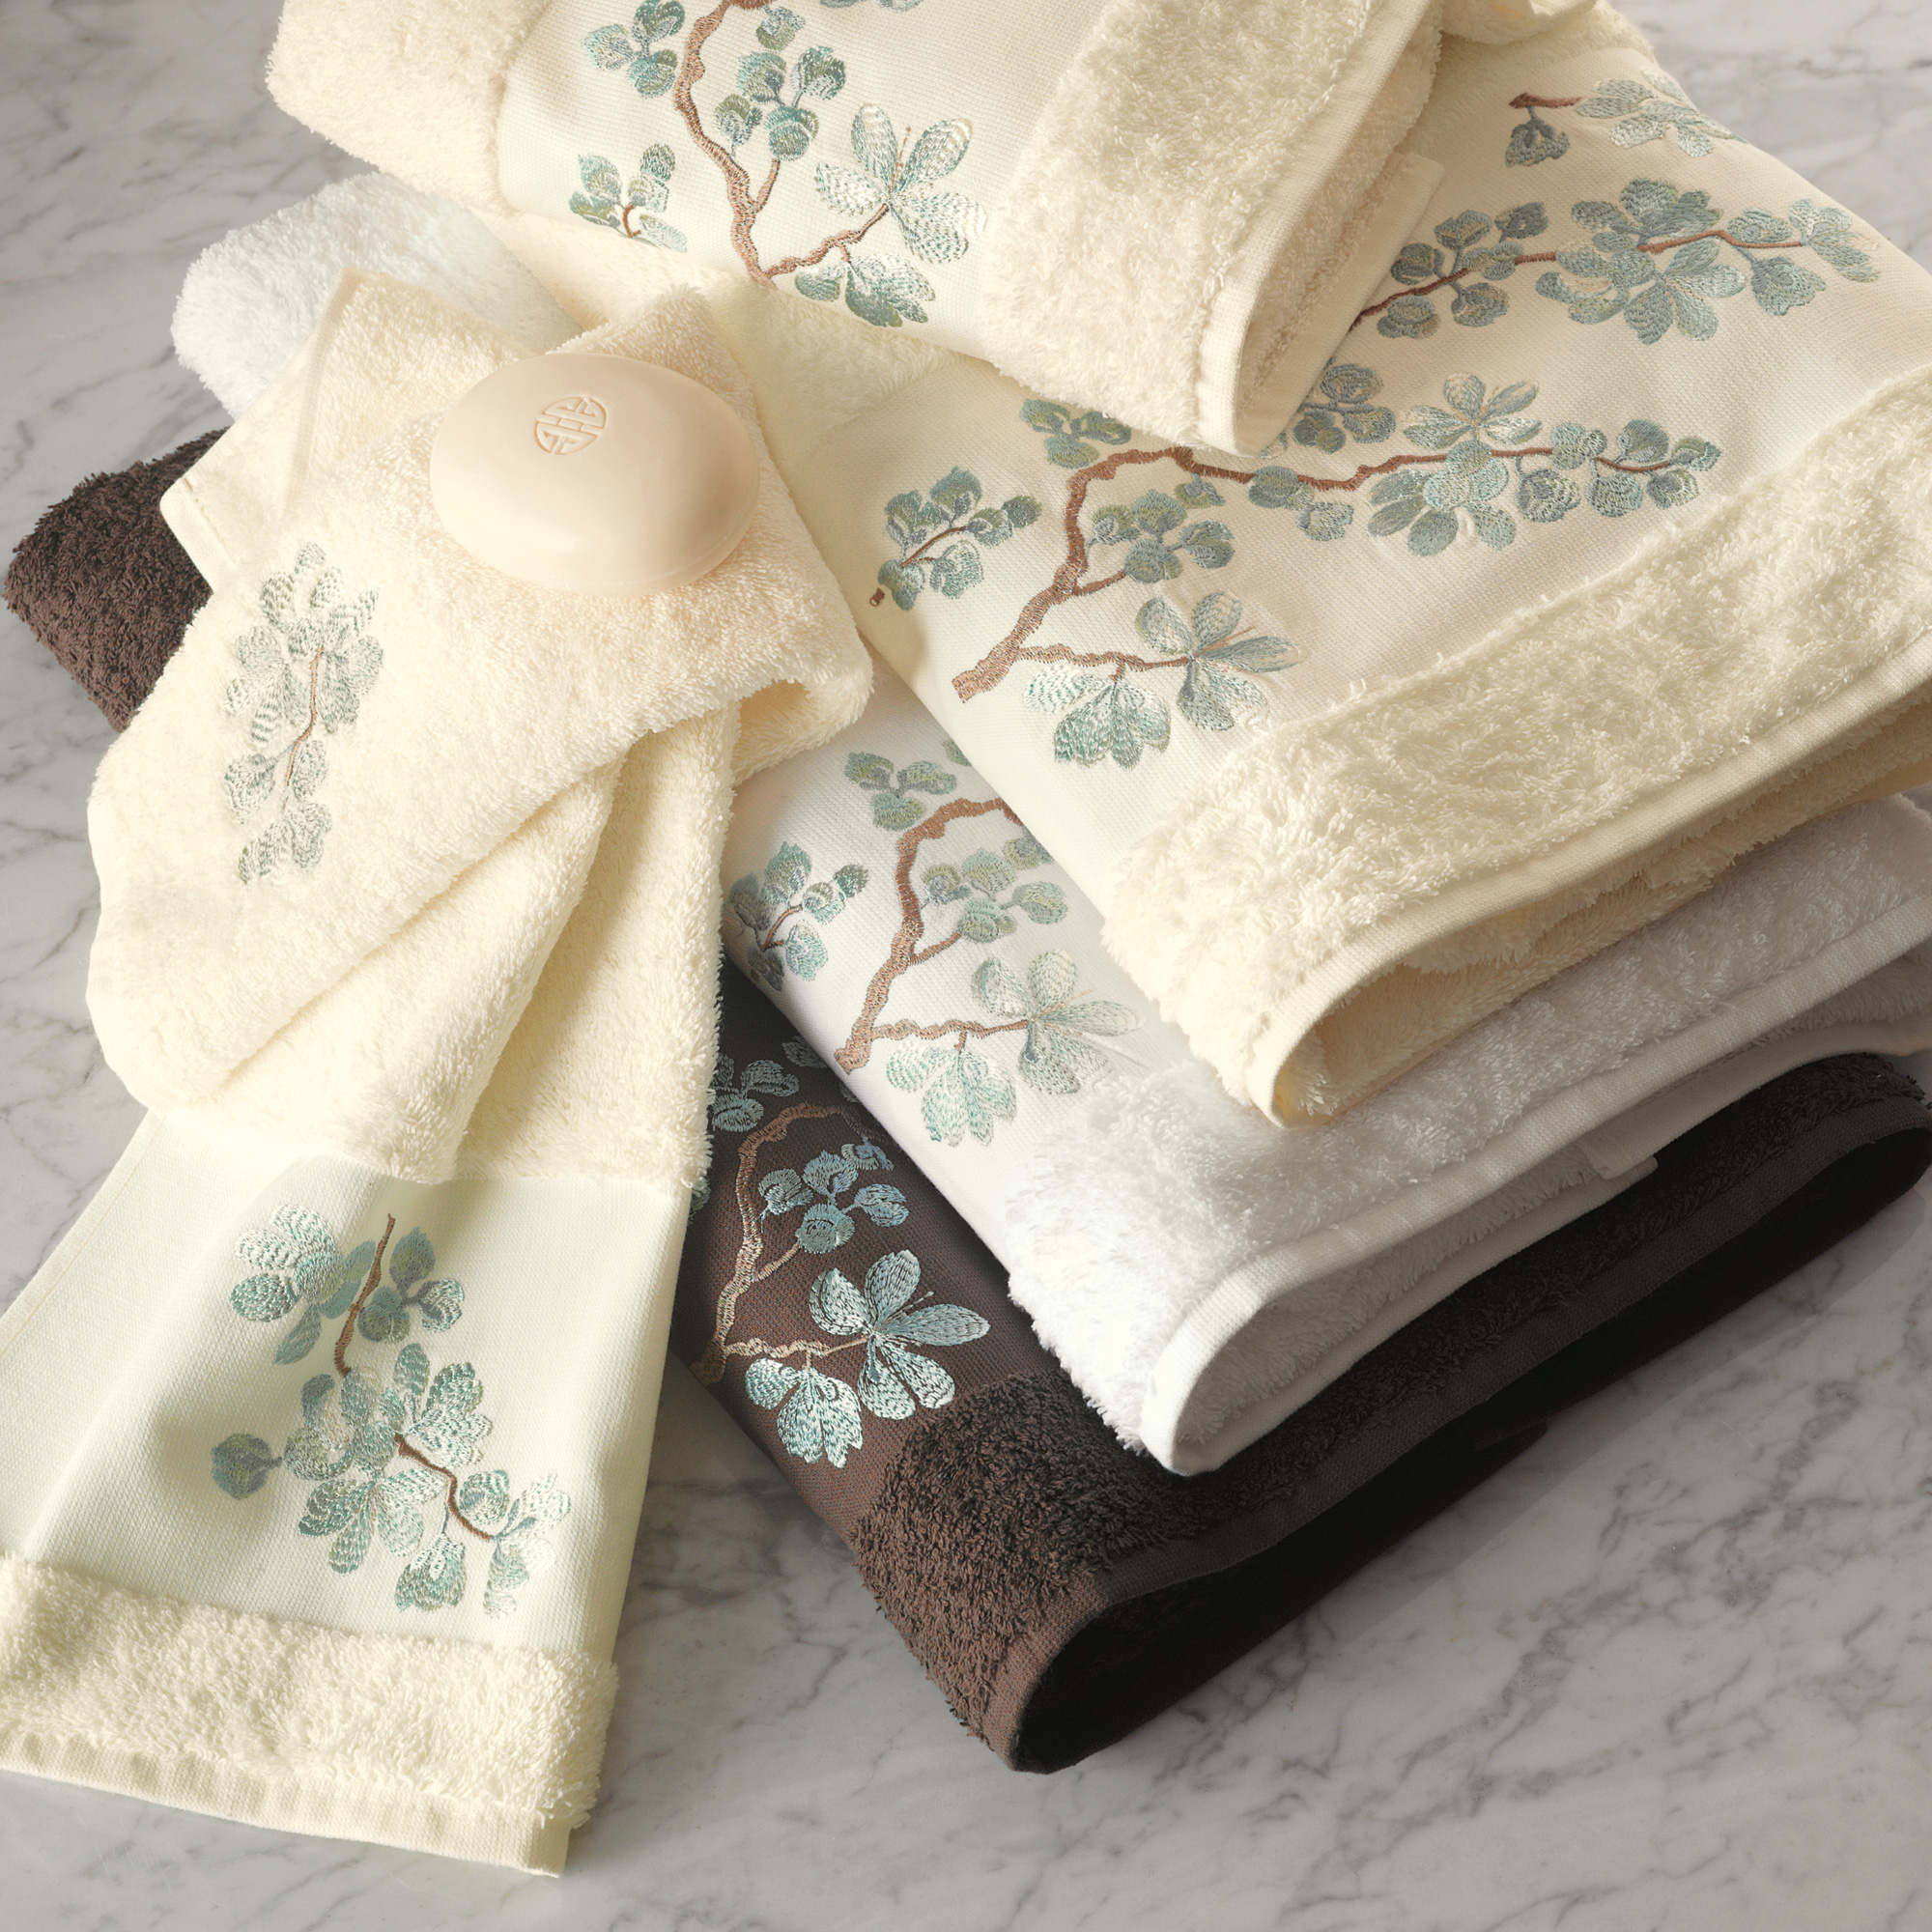 Blue Floral Embroidered Towels | Gump's